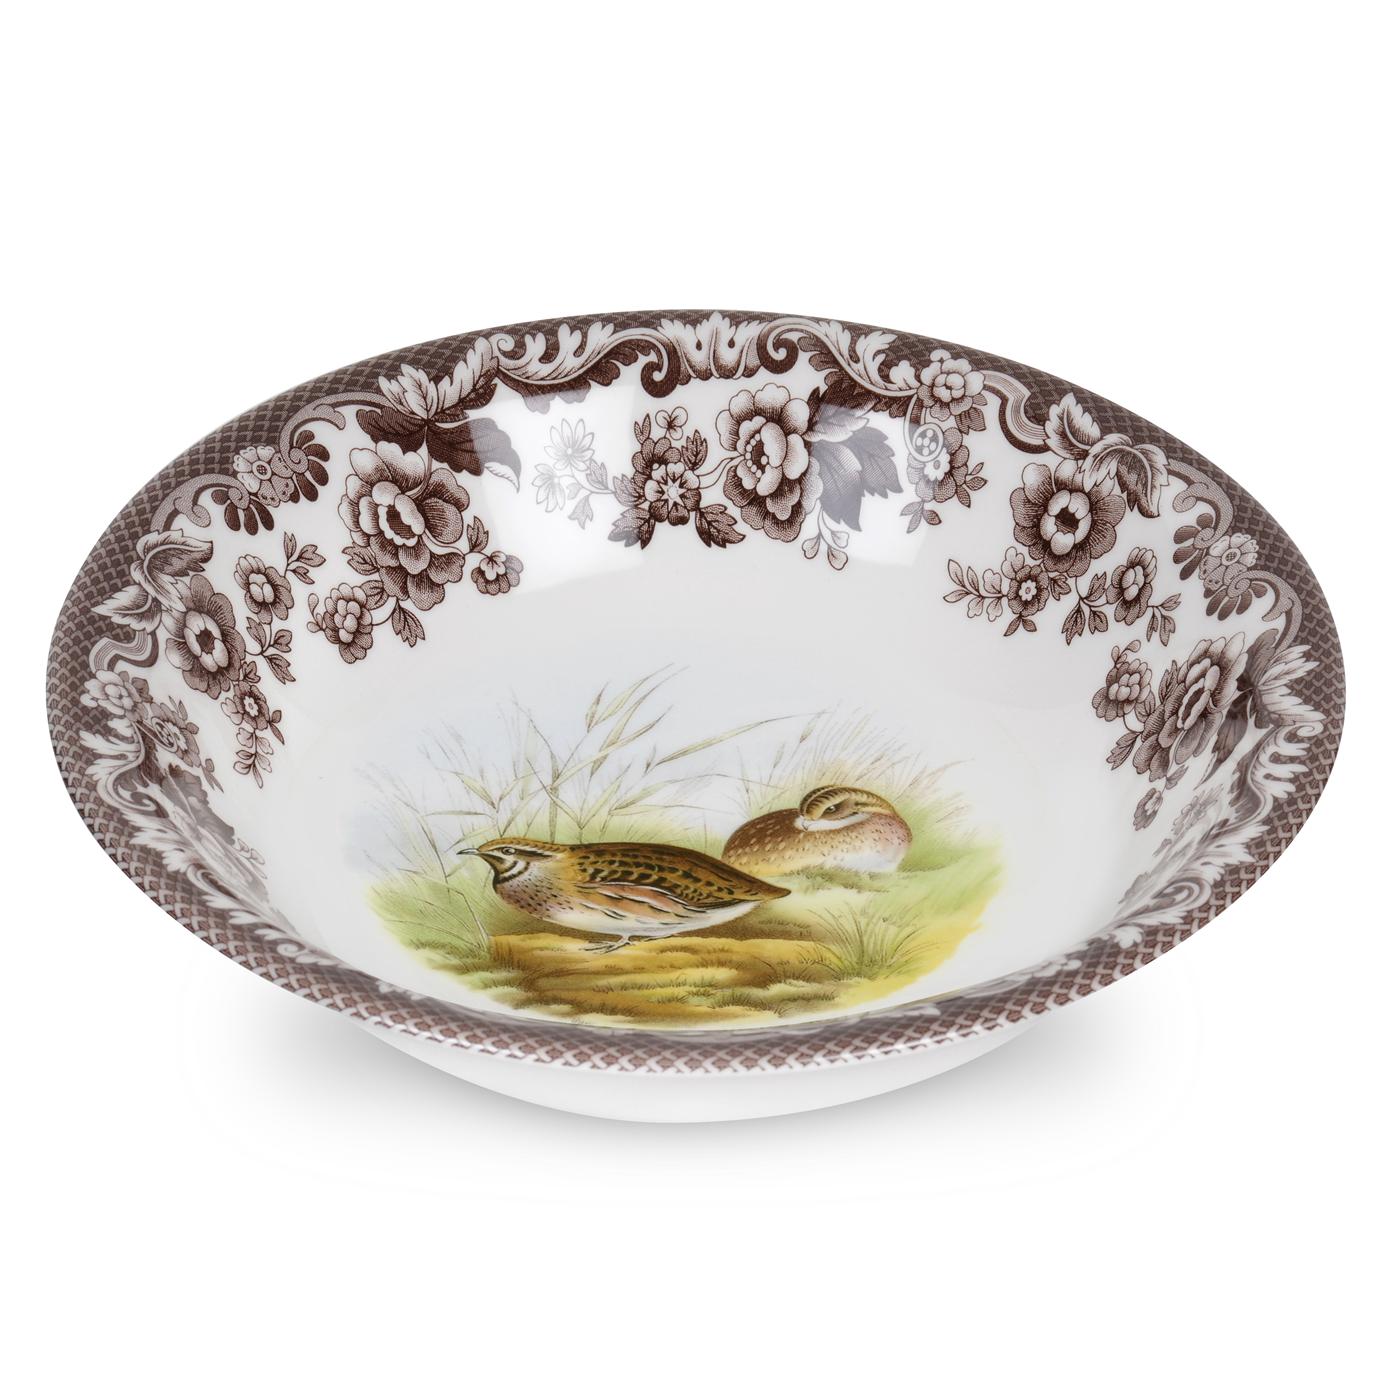 Woodland Ascot Cereal Bowl 8 Inch (Quail) image number null